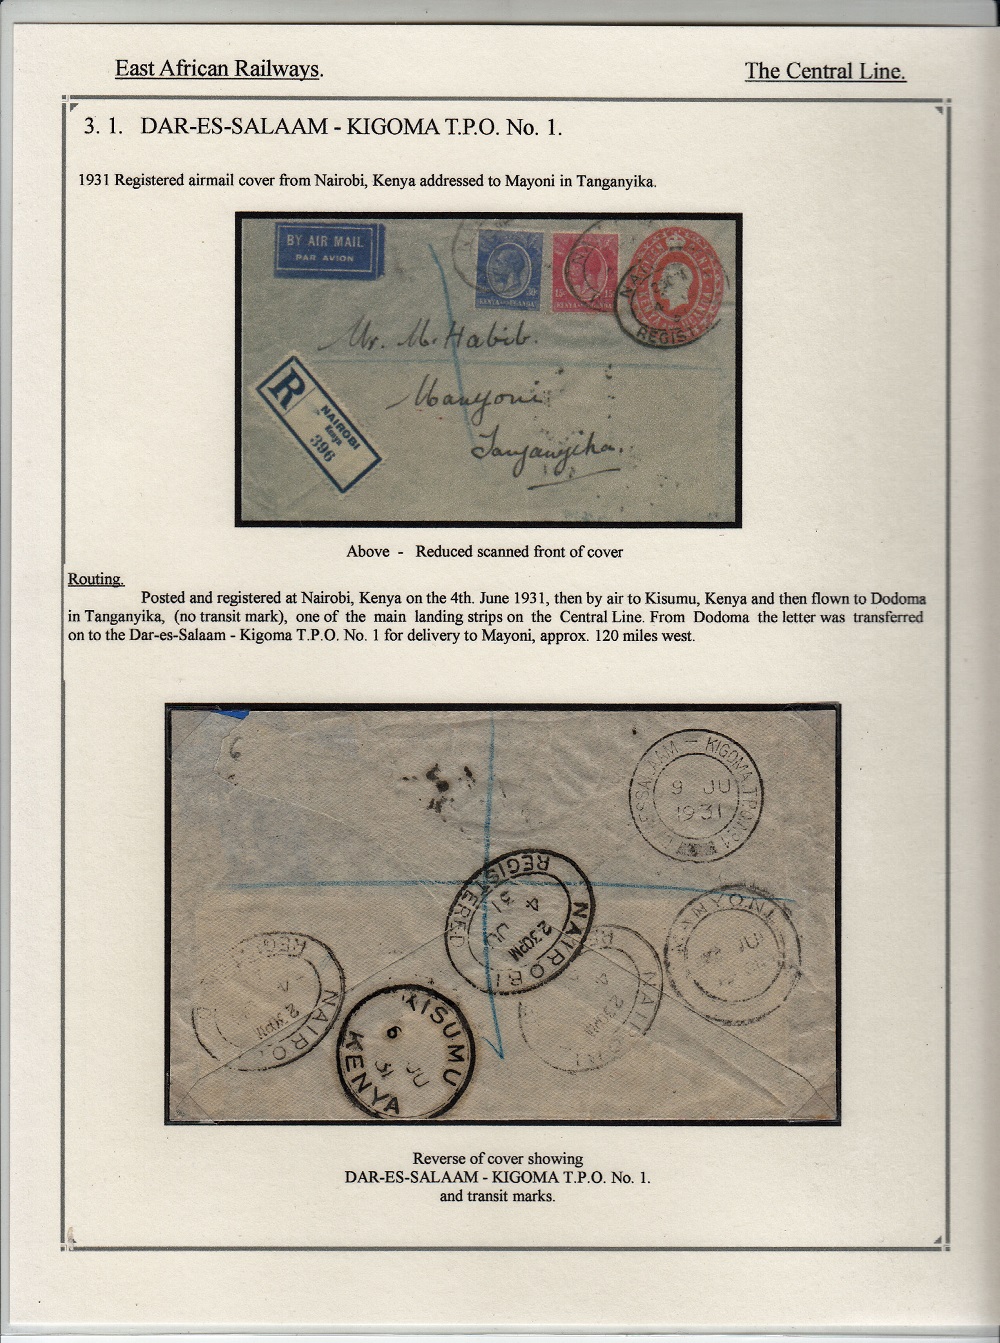 Page 14 of exhibit